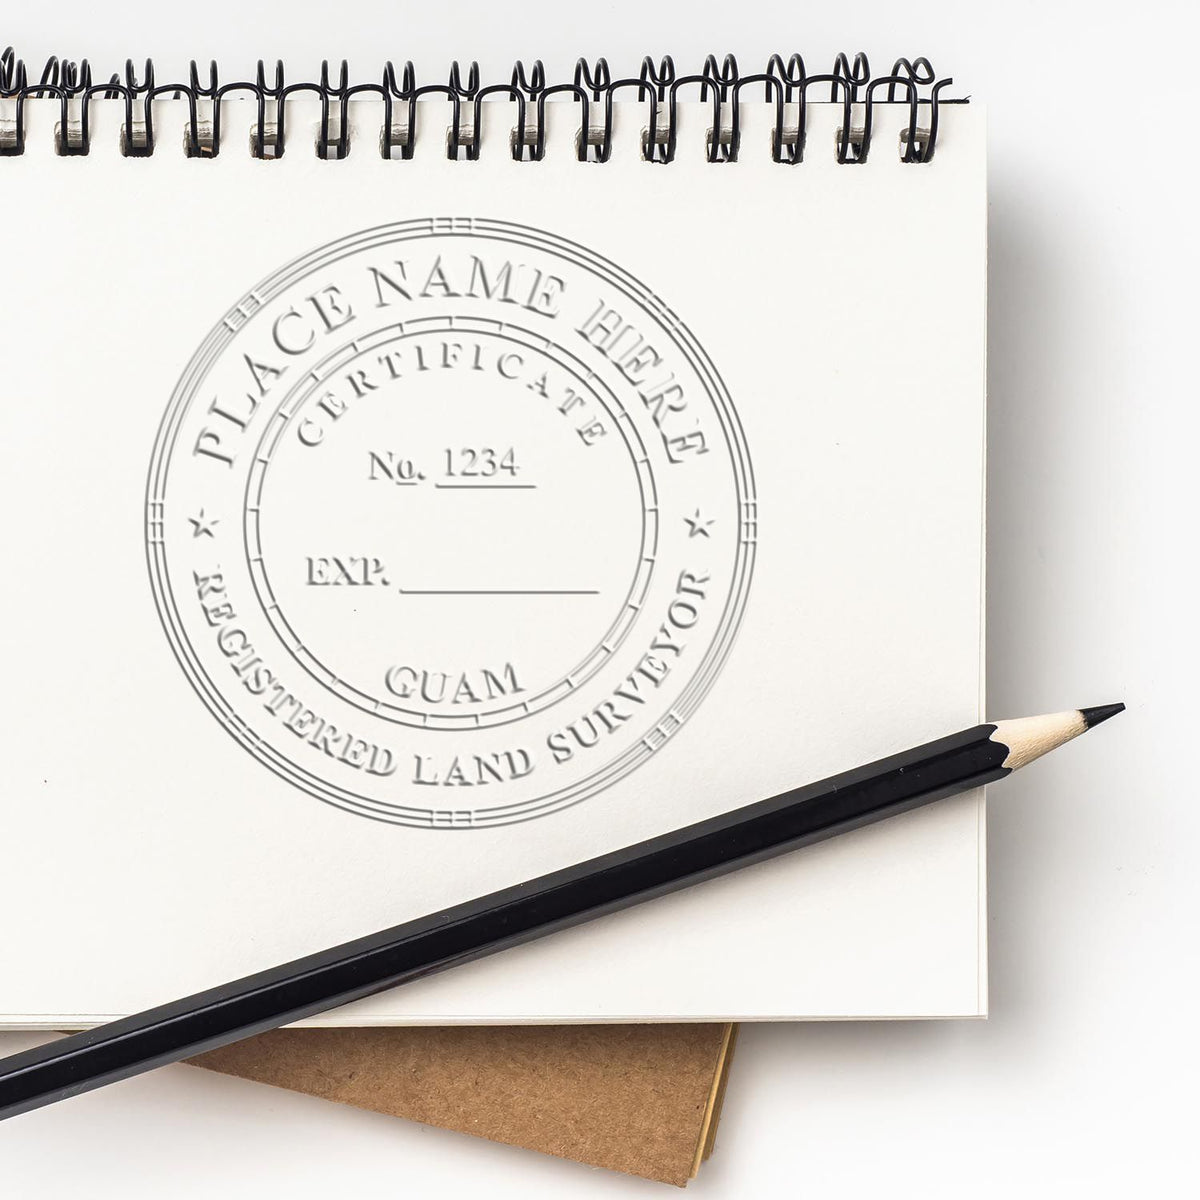 Another Example of a stamped impression of the State of Guam Soft Land Surveyor Embossing Seal on a piece of office paper.